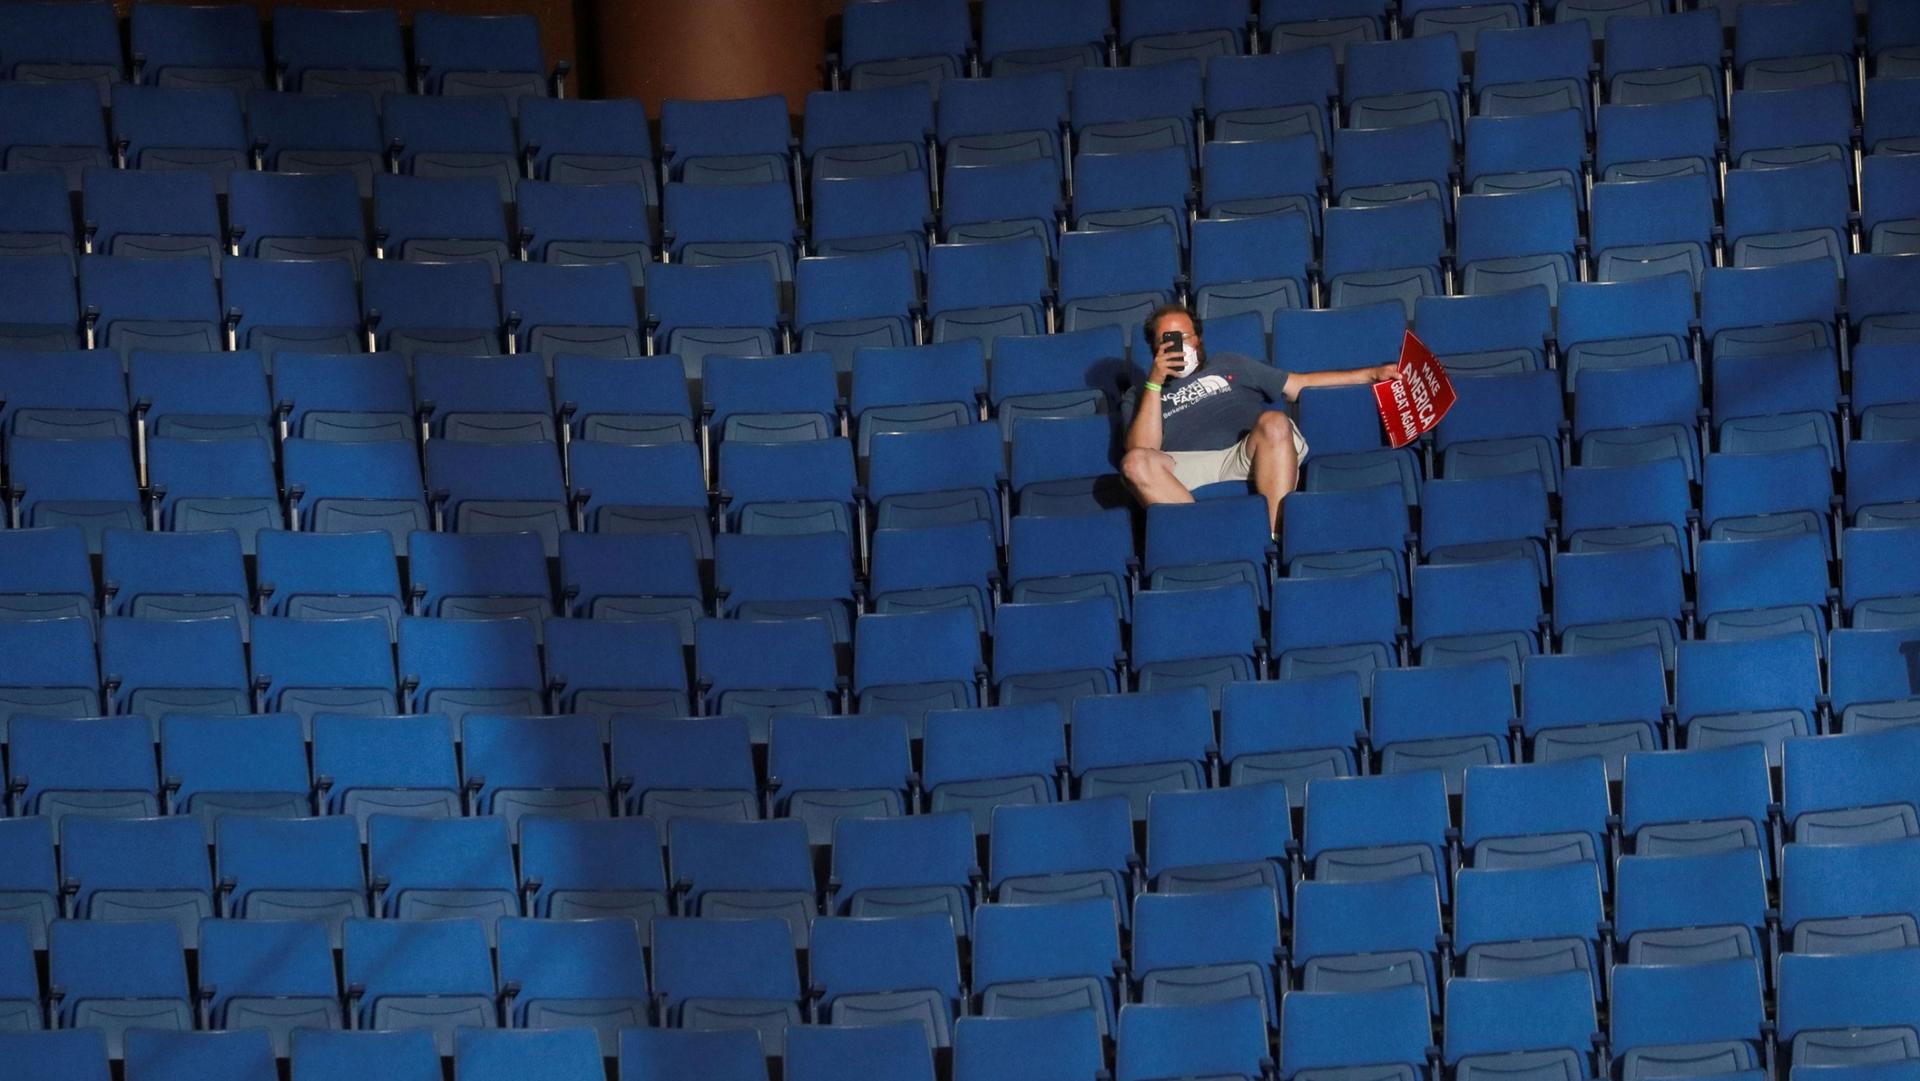 A man is shown sitting in a chairi in an arena hollding his phone up with empty rows of chairs all around him.